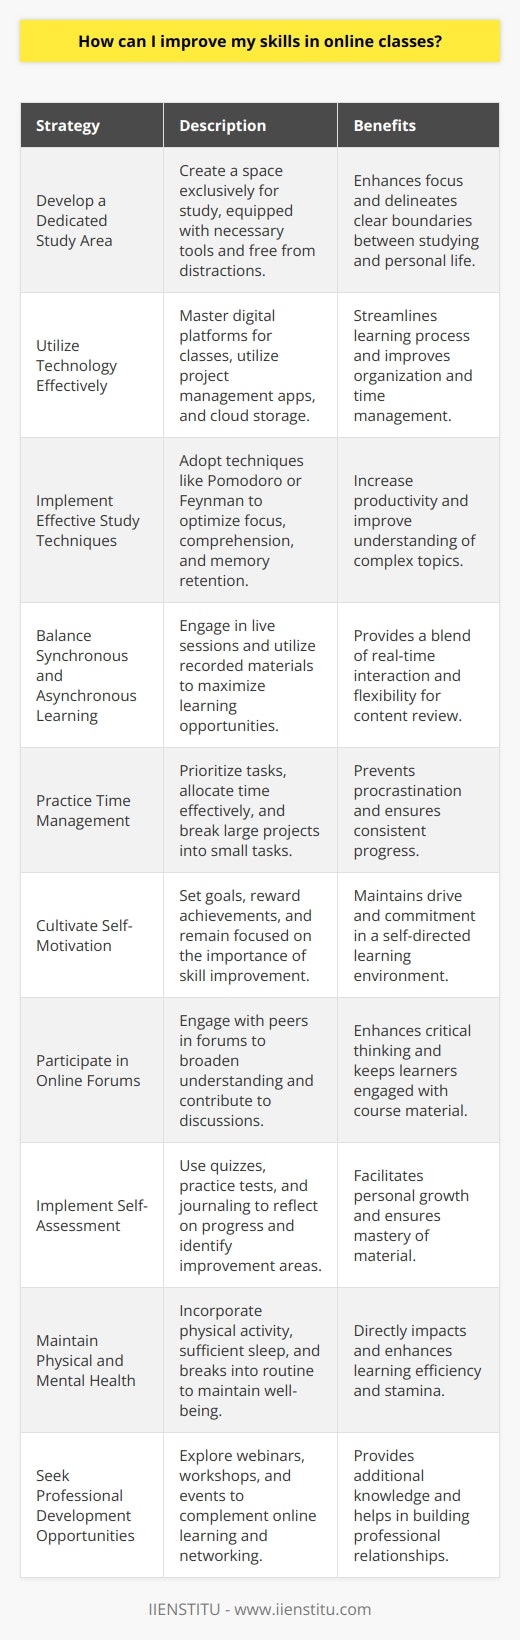 Improving skills in online classes requires a multifaceted approach that is tailored to the digital learning environment. While IIENSTITU provides ample opportunities for online learning, maximizing these opportunities involves personal commitment and strategies.Develop a Dedicated Study AreaCreating a space dedicated exclusively to study will help define clear boundaries between classwork and personal activities. This area should be equipped with all the necessary tools and be free from distractions, fostering a productive learning atmosphere.Utilize Technology EffectivelyLeverage the technology at your disposal to enhance your learning experience. Familiarize yourself with the digital platforms used for the online classes and explore additional tools that facilitate organization, time management, and collaboration, such as project management apps or cloud storage services.Implement Effective Study TechniquesAdopt study methods that are proven to be effective, such as the Pomodoro Technique or the Feynman Technique, to optimize your learning. Such methods can aid in maintaining focus, understanding complex topics, and retaining information more efficiently.Balance Synchronous and Asynchronous LearningOnline classes typically offer both live (synchronous) sessions and recorded (asynchronous) materials. Balance your time between these to benefit from the live interactions with instructors and the flexibility of revisiting recorded content as needed.Practice Time ManagementGood time management is key in online learning. Prioritize tasks with a to-do list and allocate time for each based on urgency and importance. Avoid procrastination by breaking larger projects into smaller, manageable tasks.Cultivate Self-MotivationWithout the physical presence in a traditional classroom, sustaining motivation can be challenging. Keep your end goals in sight, reward yourself for small achievements, and remind yourself why improving your skills is essential for your personal and professional growth.Participate in Online ForumsOnline forums and discussion boards are excellent places to expand your understanding by reading about others' questions and participating in conversations. These platforms can help you think critically about the content and stay engaged with the course material.Implement Self-AssessmentConduct periodic self-assessments to gauge your understanding and skill development. Use quizzes, practice tests, and reflective journaling to evaluate your progress and identify areas for improvement.Maintain Physical and Mental HealthPhysical and mental well-being directly impacts learning efficiency. Incorporate regular physical activity into your routine, ensure you get enough sleep, and take breaks to prevent burnout.Seek Professional Development OpportunitiesBeyond the scope of your online classes, look for professional development opportunities that can complement and enhance your learning. Webinars, workshops, and industry-specific events can provide additional knowledge and networking opportunities.In conclusion, improving skills in online classes requires a balance of self-discipline, effective use of technology, strategic studying, and continuous self-evaluation. By adopting these strategies, students can optimize their online learning experience and achieve their educational goals.